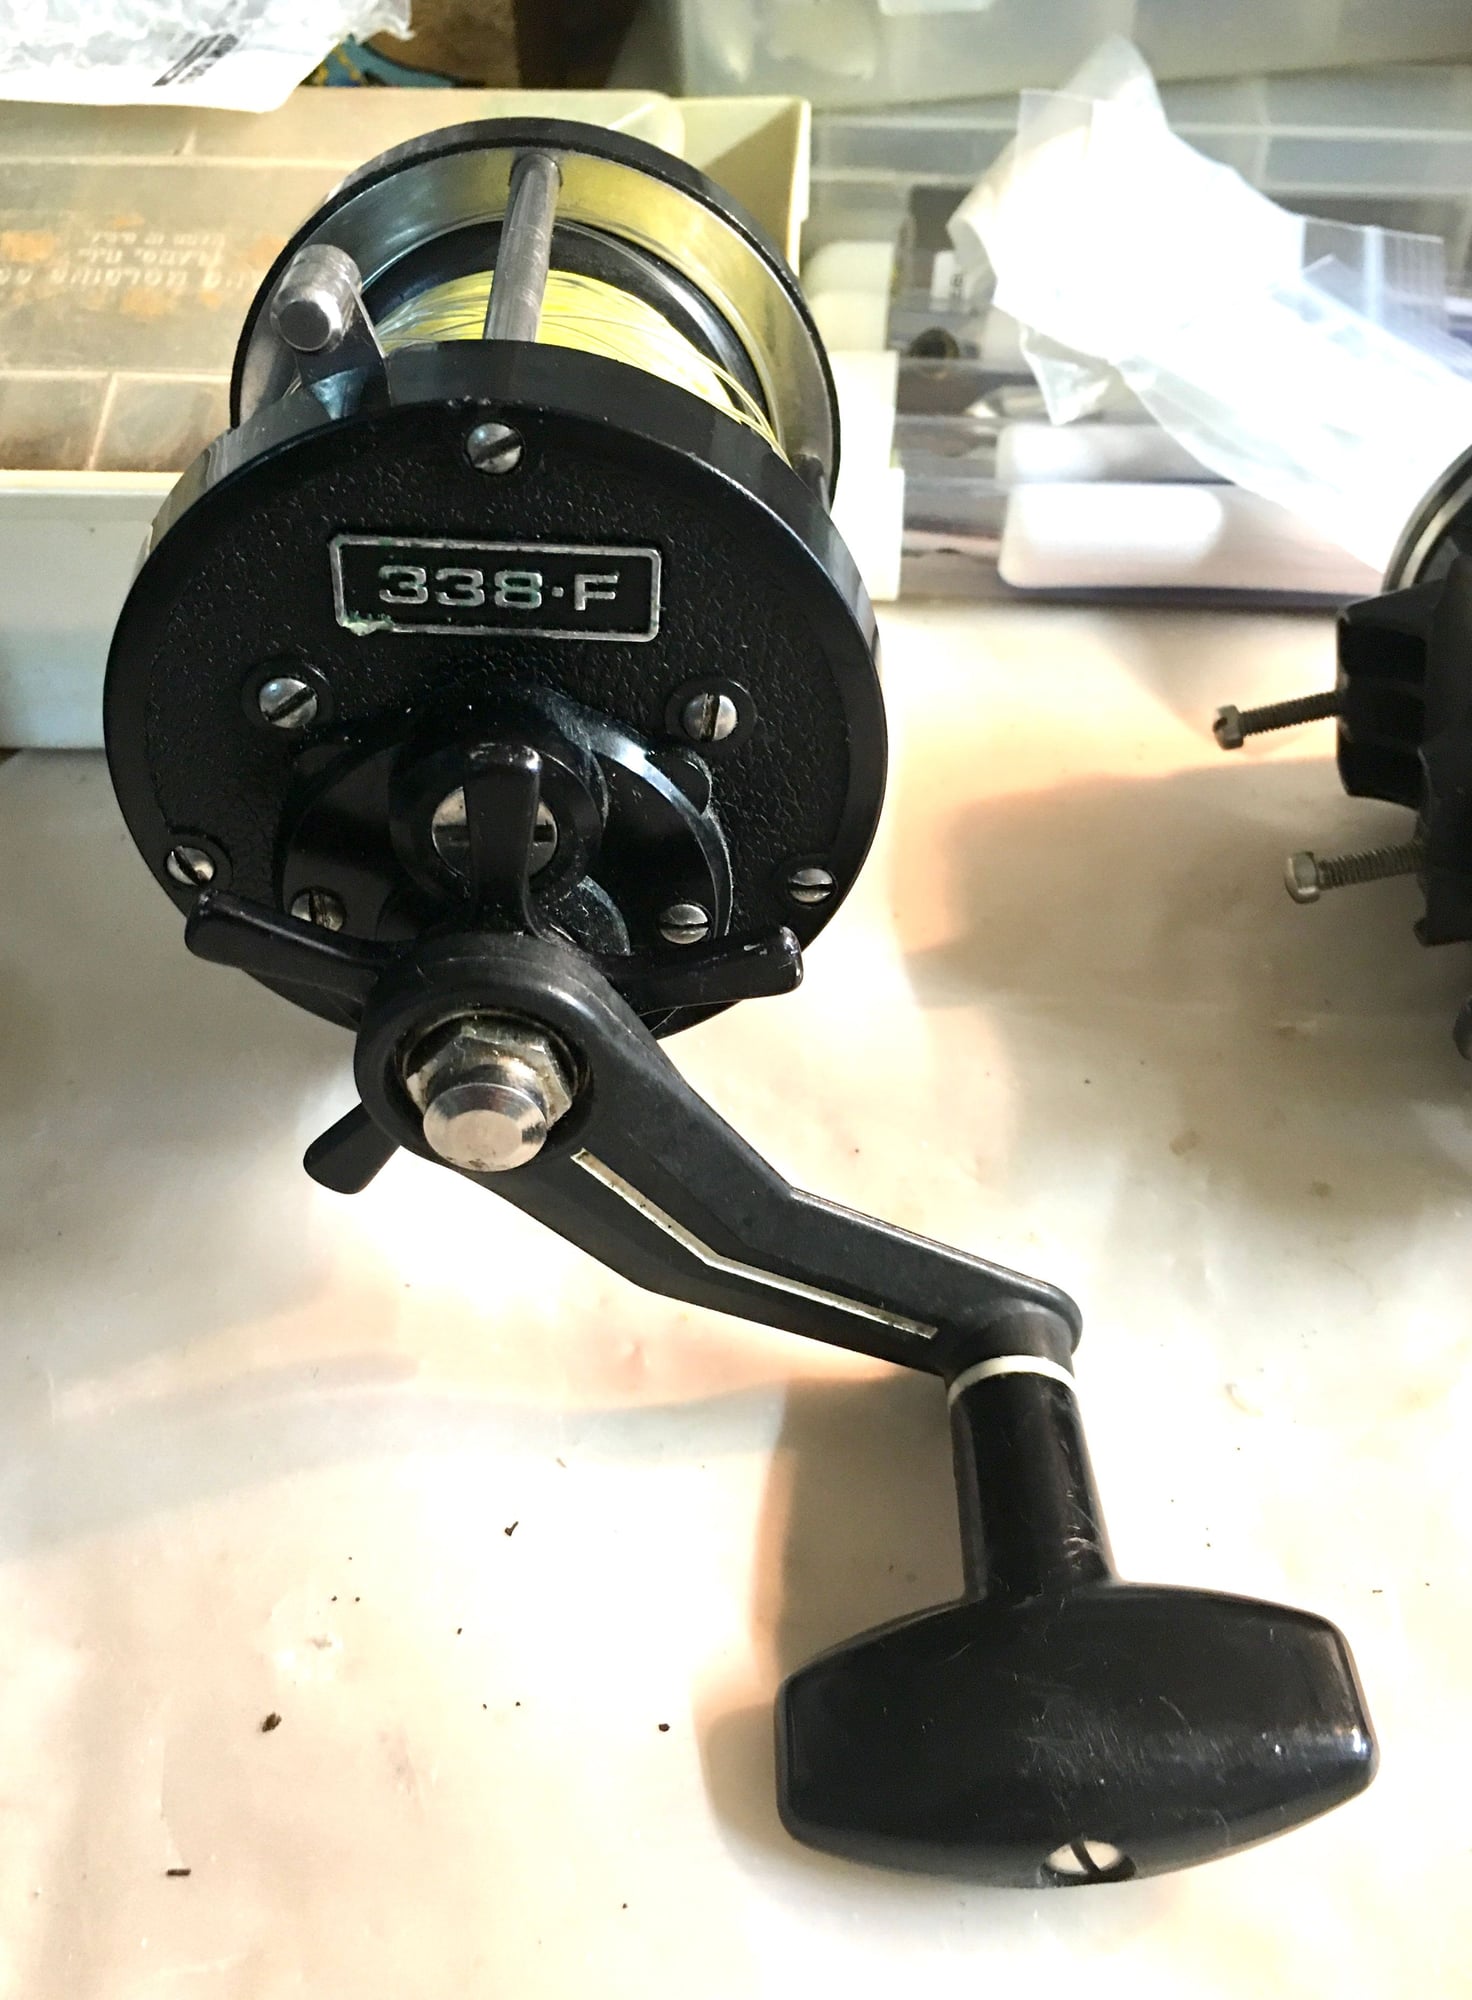 Newell Reels Set of 5 $700 - The Hull Truth - Boating and Fishing